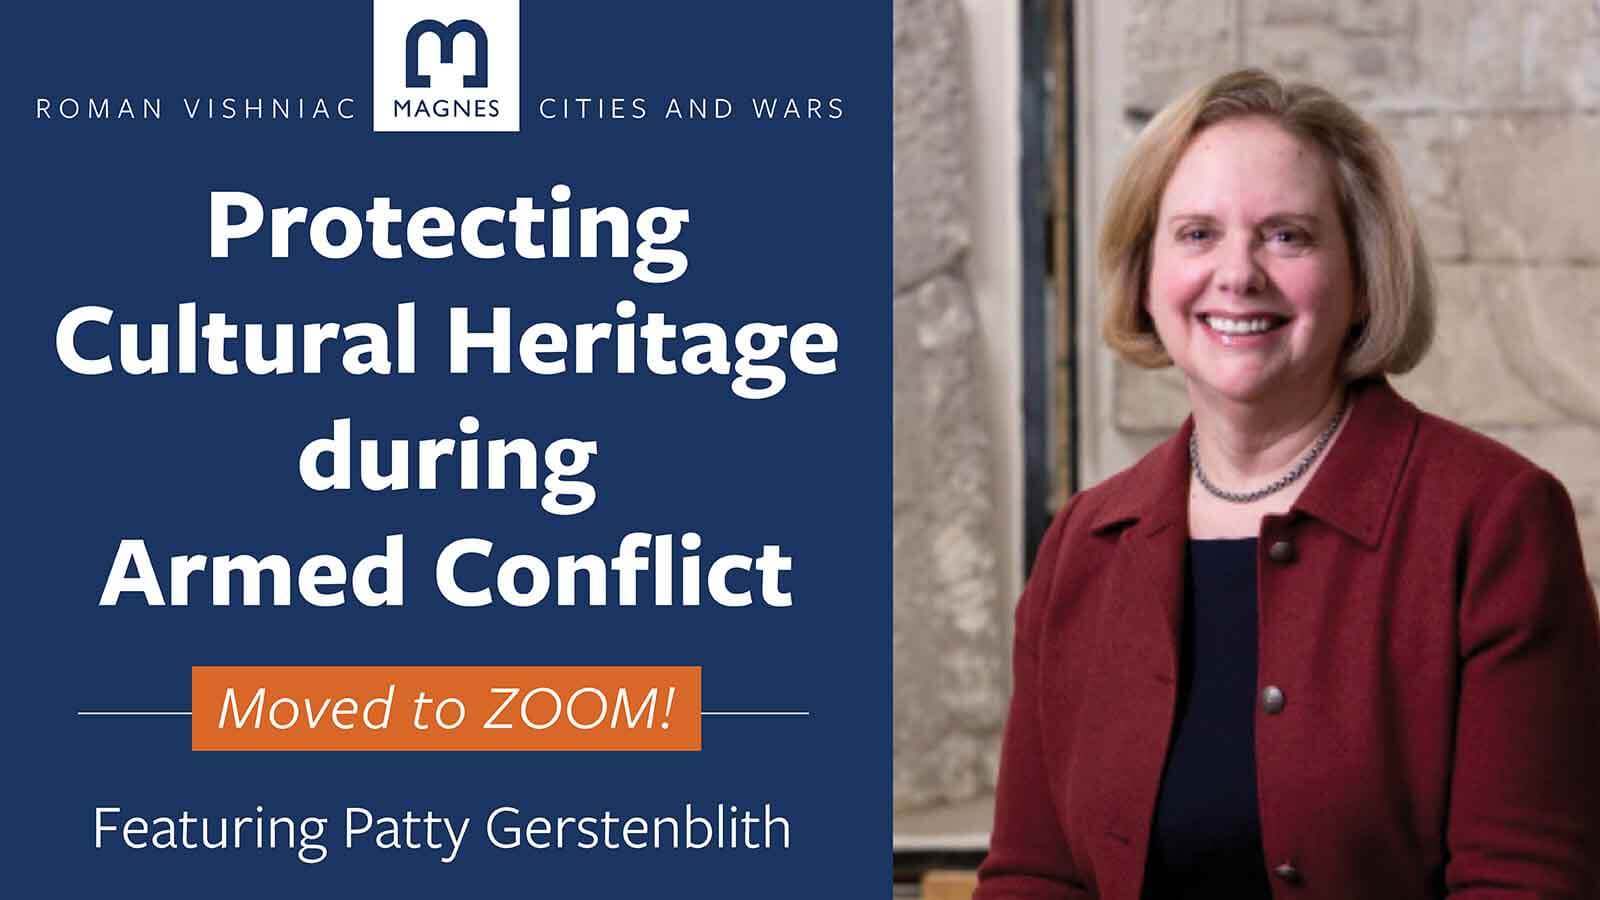 To left: Magnes logo, text: Roman Vishniac, Cities and Wars, Protecting Cultural Heritage during Armed Conflict, moved to Zoom! Featuring Patty Gerstenblith, on dark blue background. To right photo of woman in burgundy suit jacket.